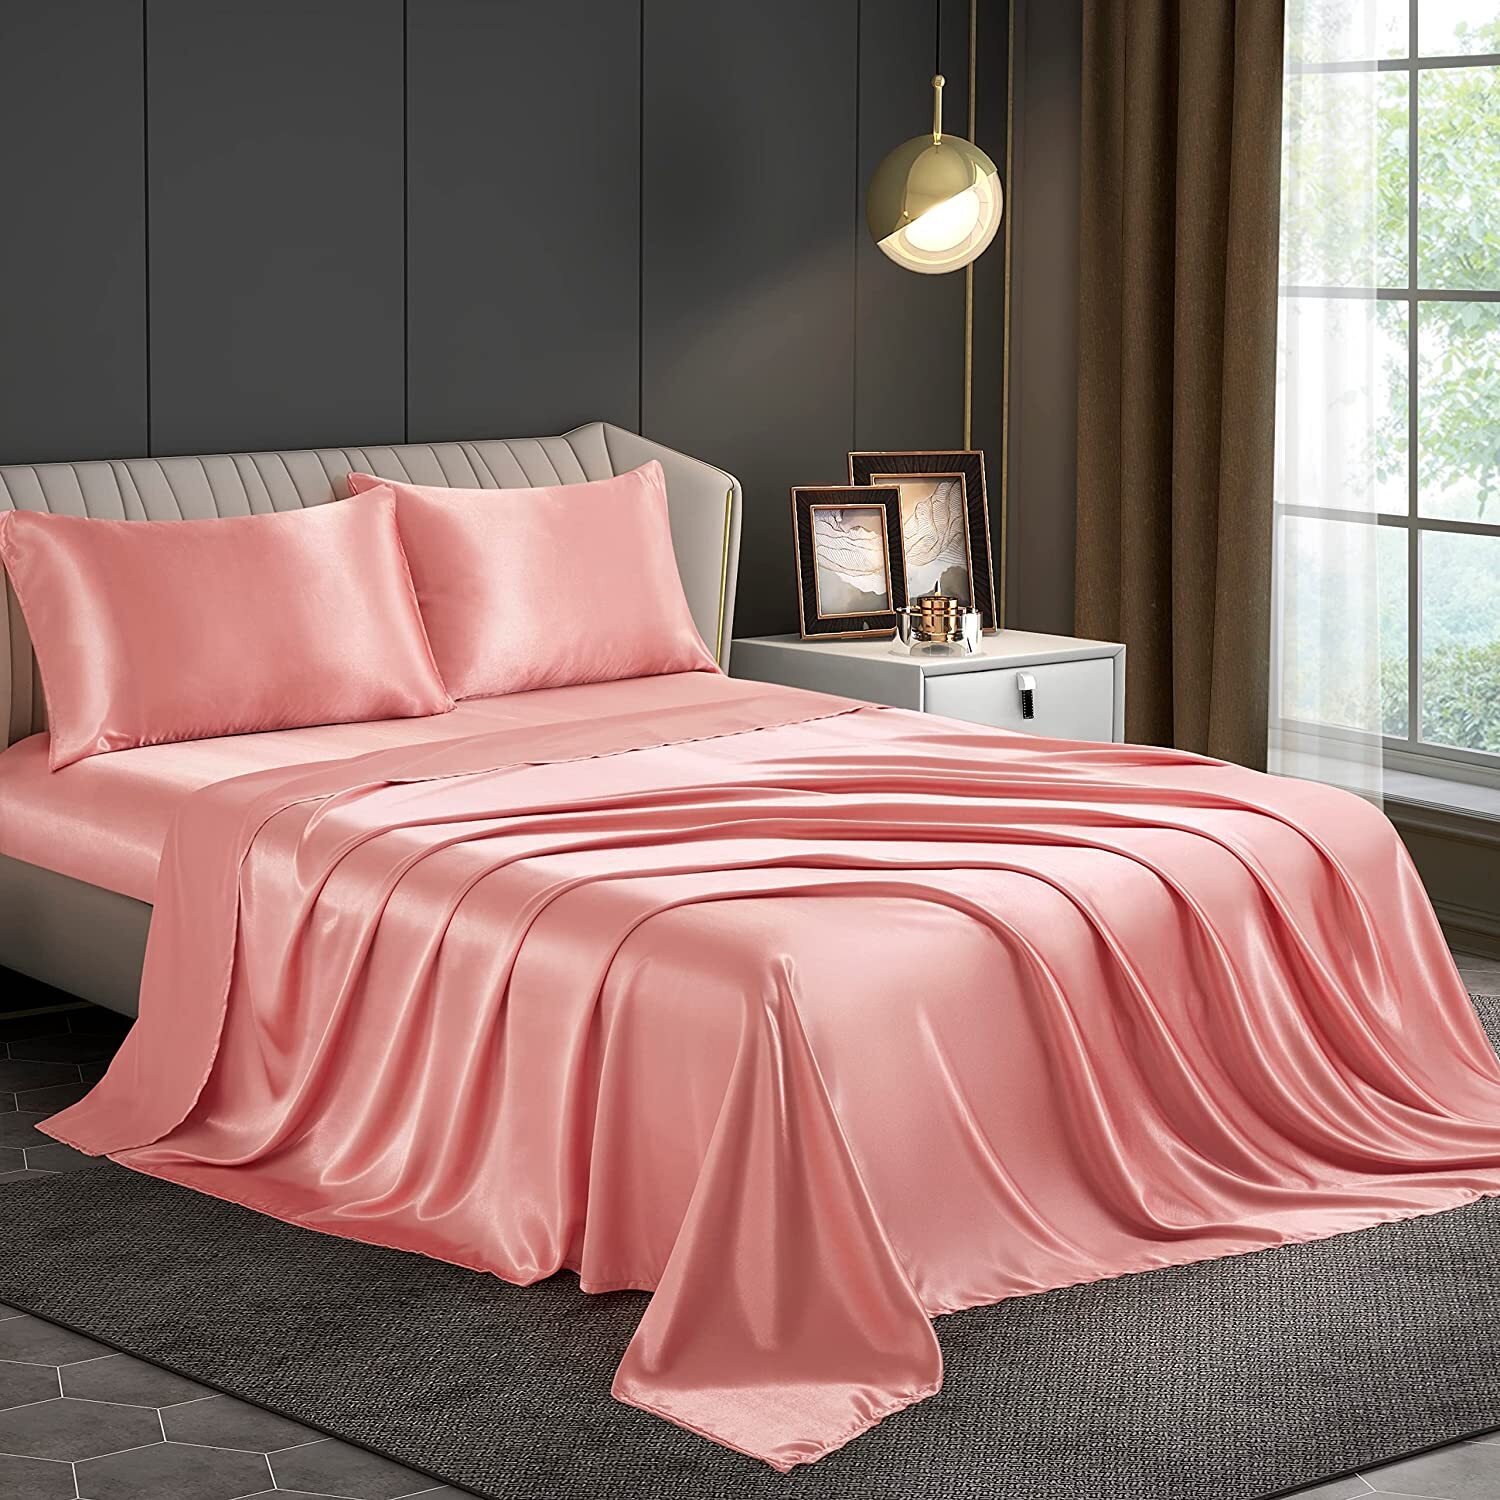 Luxury 4-Piece Silky Satin Flat Fitted Sheets Pillowcase Bed Set (Rose Gold, King)